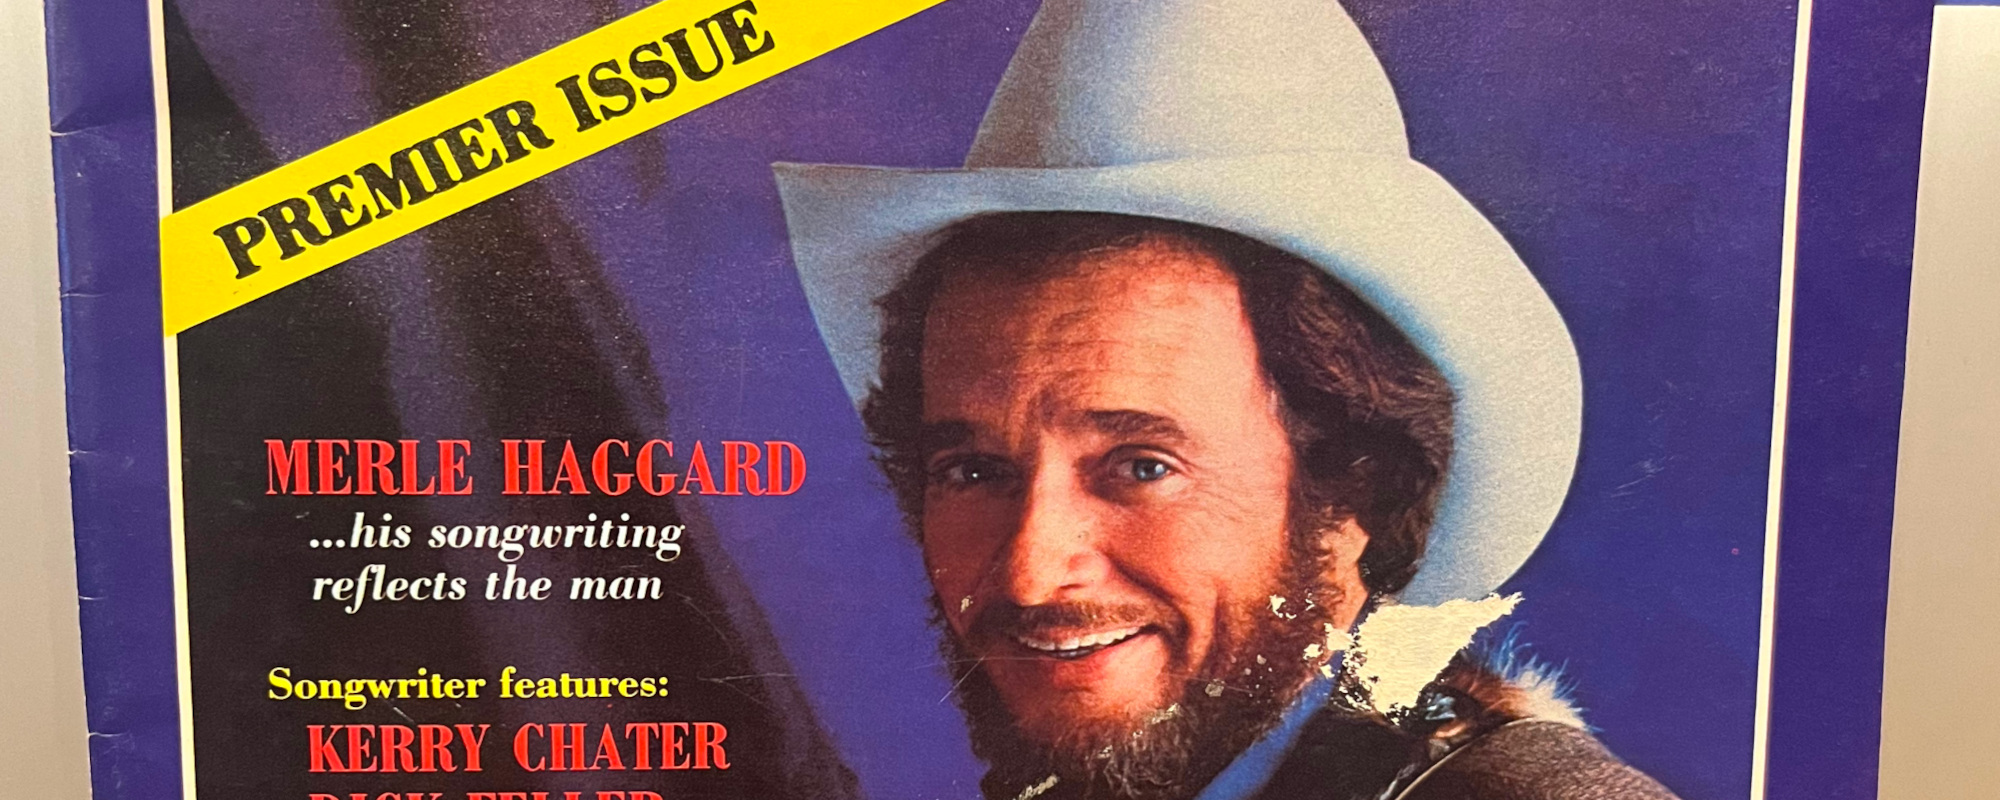 American Songwriter Throwback August 1984 Cover Story: Merle Haggard—His Songs Reflect the Man